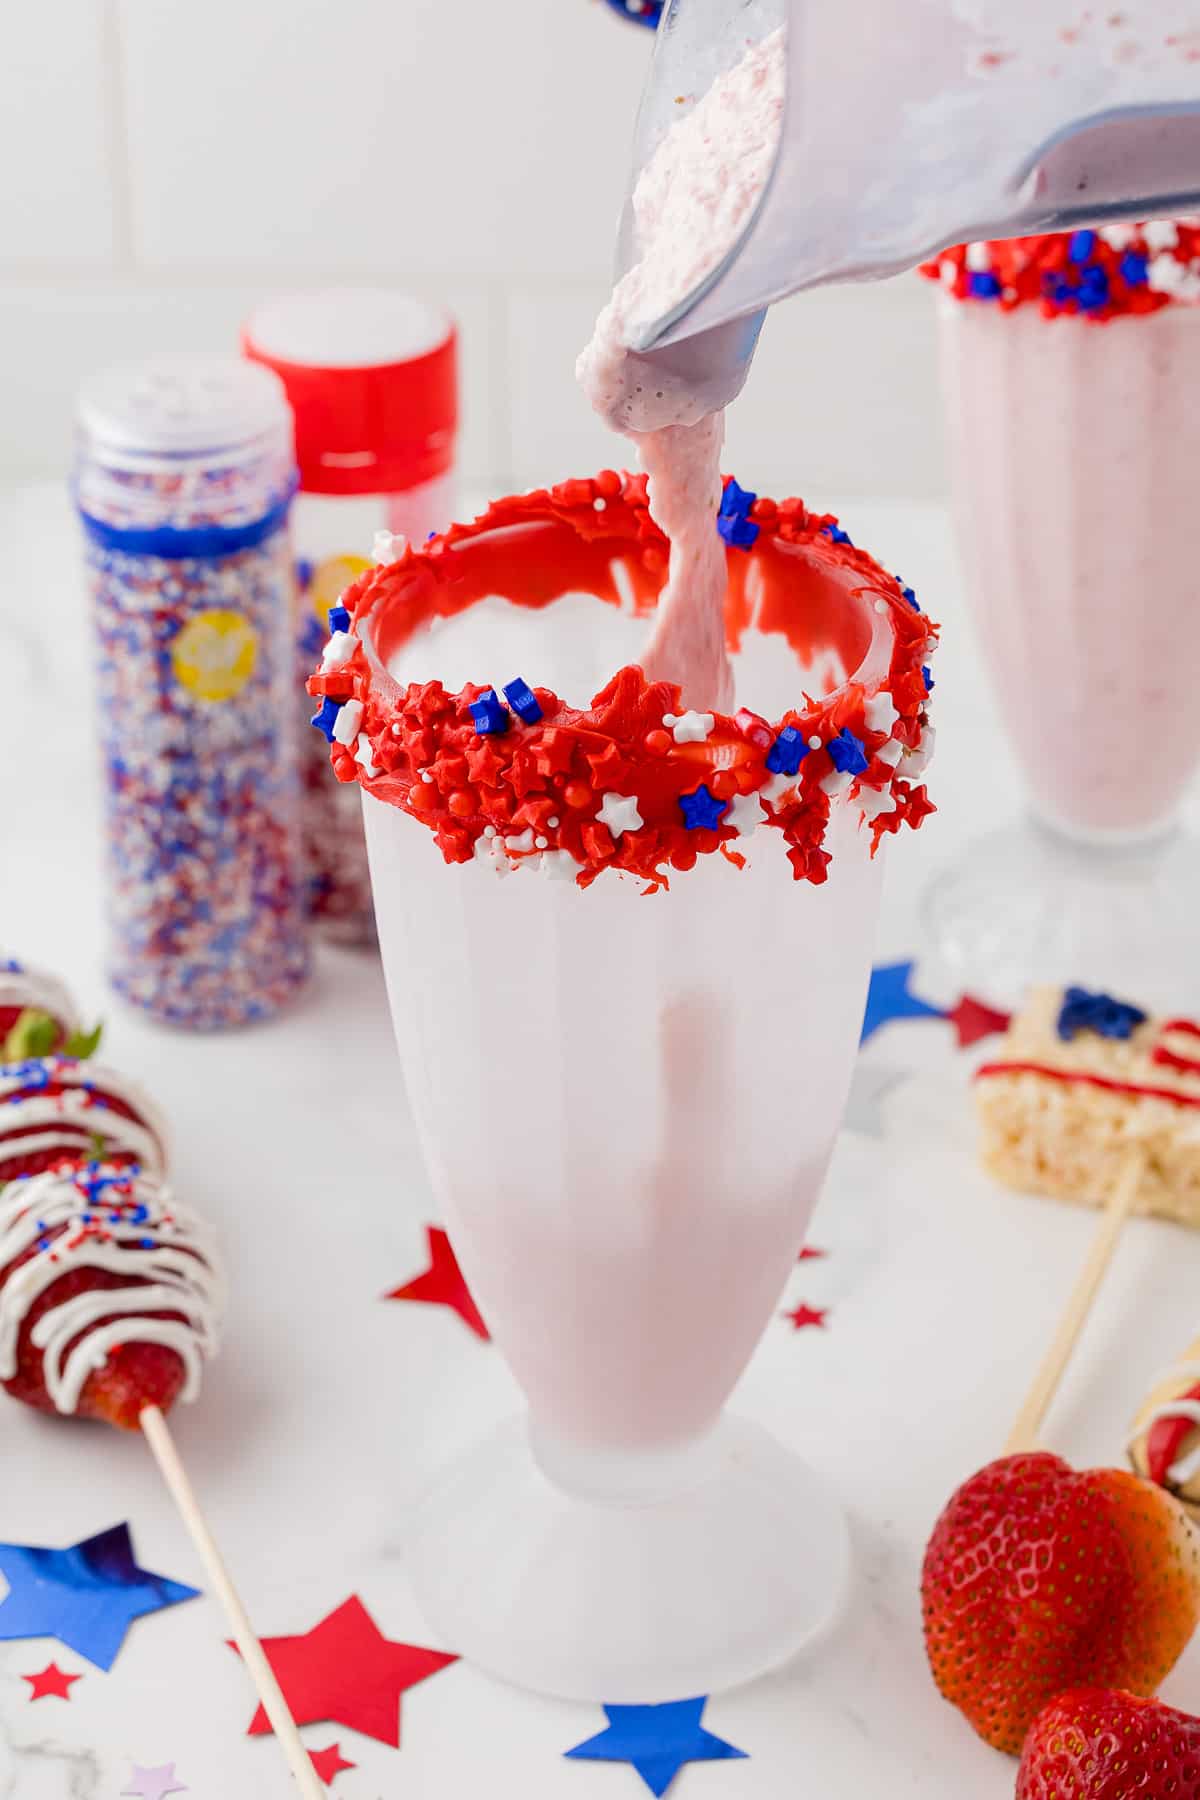 strawberry milkshake being poured into a frosted shake glass that is decorated with red frosting on the rim and red white and blue sprinkle stars.